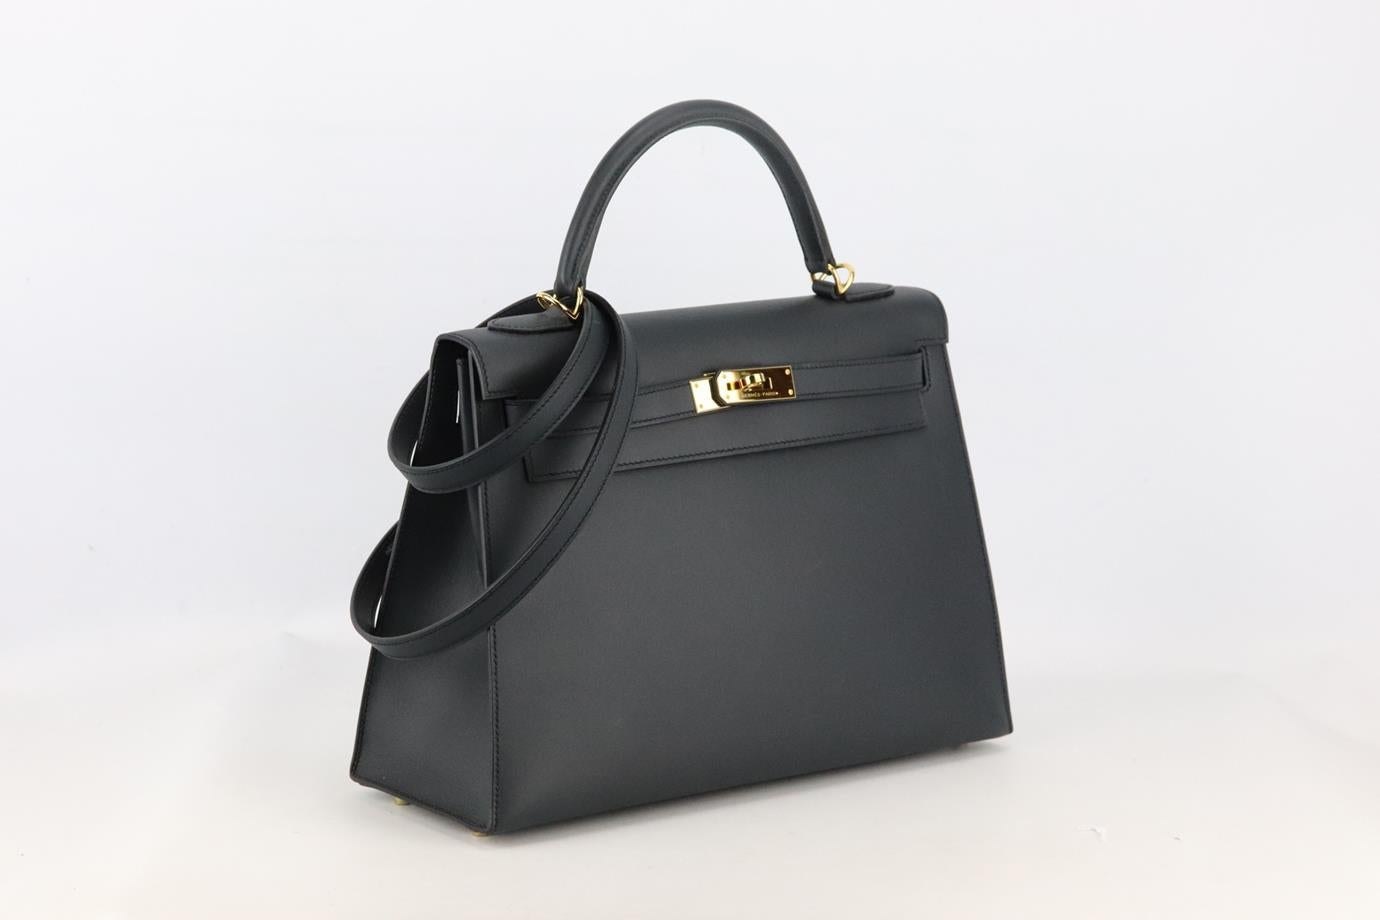 <ul>
<li>Hermès 2015 Kelly Sellier 32cm Sombrero leather bag.</li>
<li>Made in France, this beautiful 2015 Hermès ‘Kelly Sellier’ handbag has been made from black ‘Sombrero’ leather exterior in ‘Noir’ with matching interior, this piece is decorated